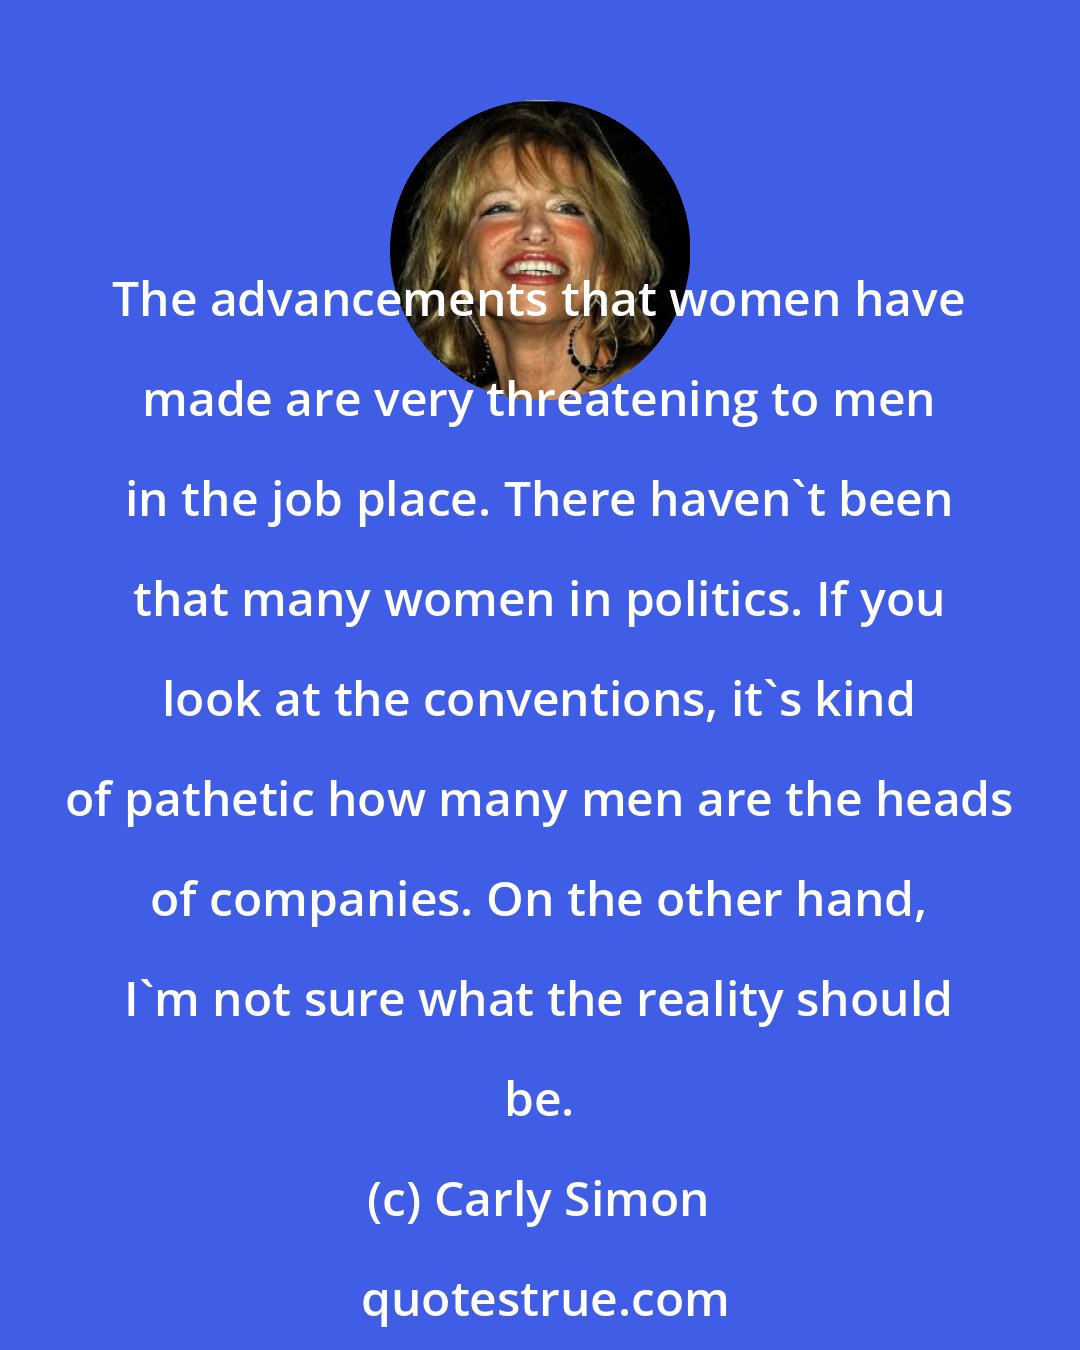 Carly Simon: The advancements that women have made are very threatening to men in the job place. There haven't been that many women in politics. If you look at the conventions, it's kind of pathetic how many men are the heads of companies. On the other hand, I'm not sure what the reality should be.